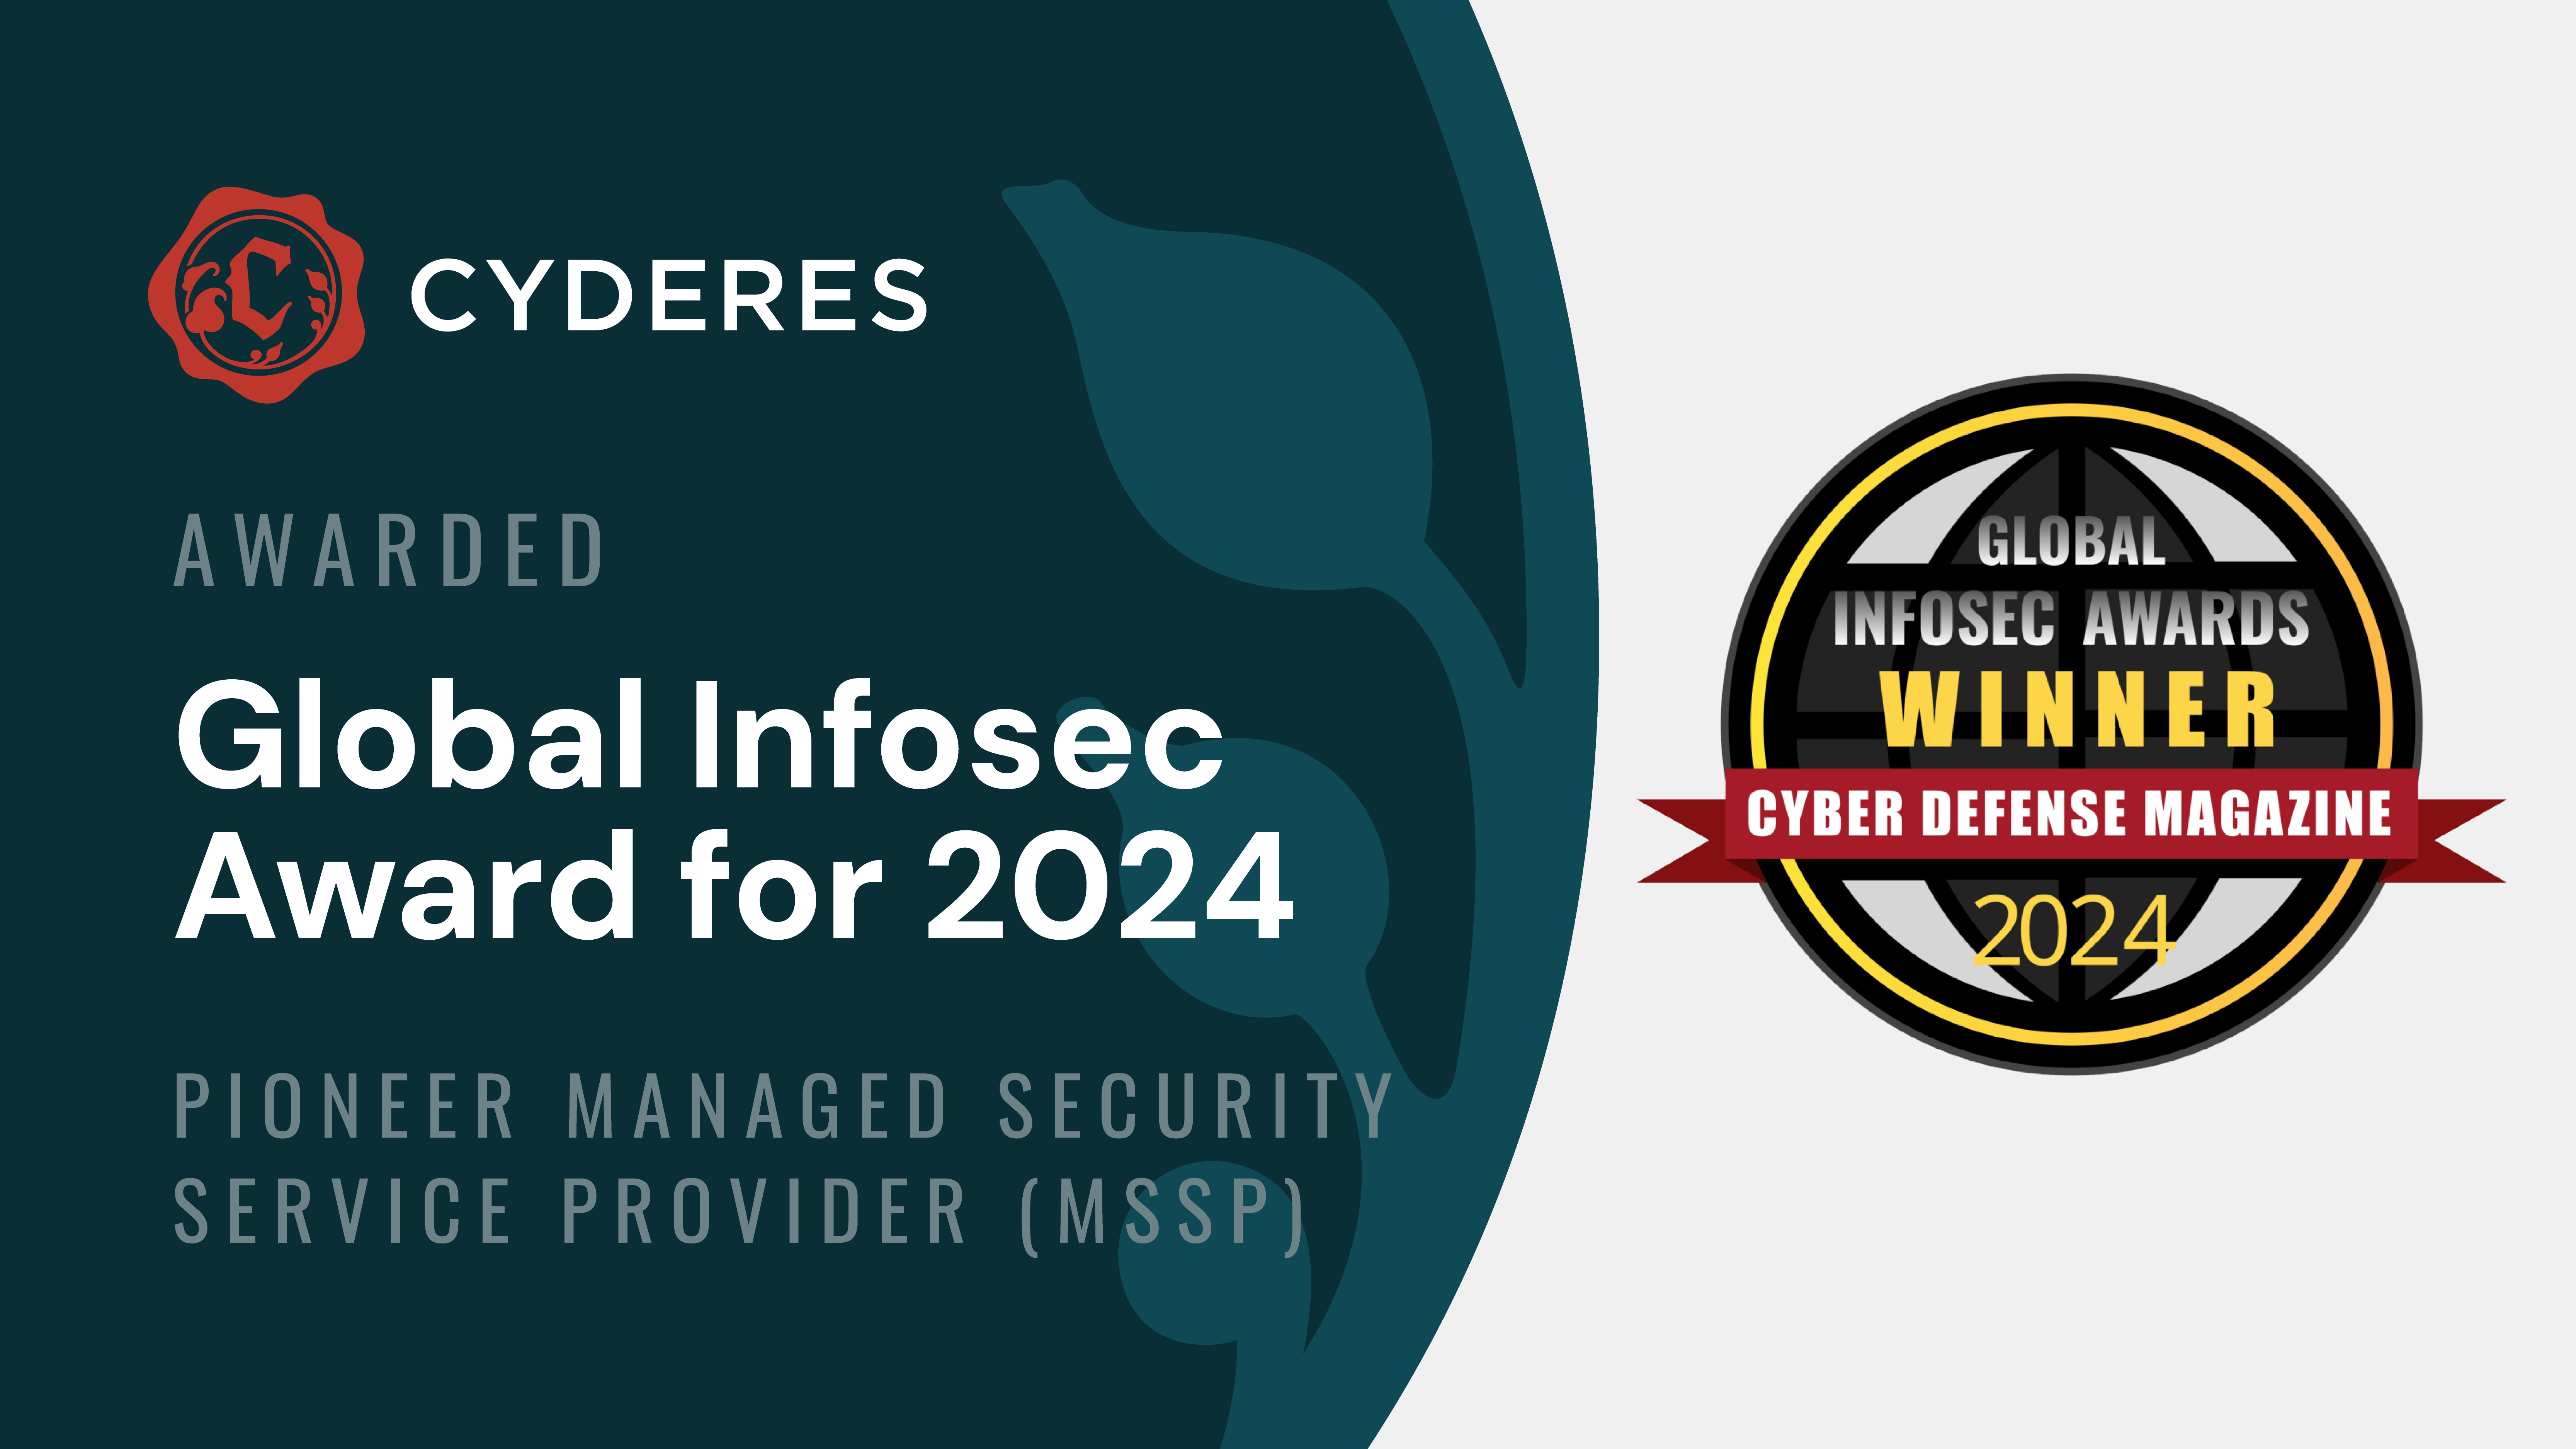 Cyderes is Recognized as Pioneer MSSP by Cyber Defense Magazine